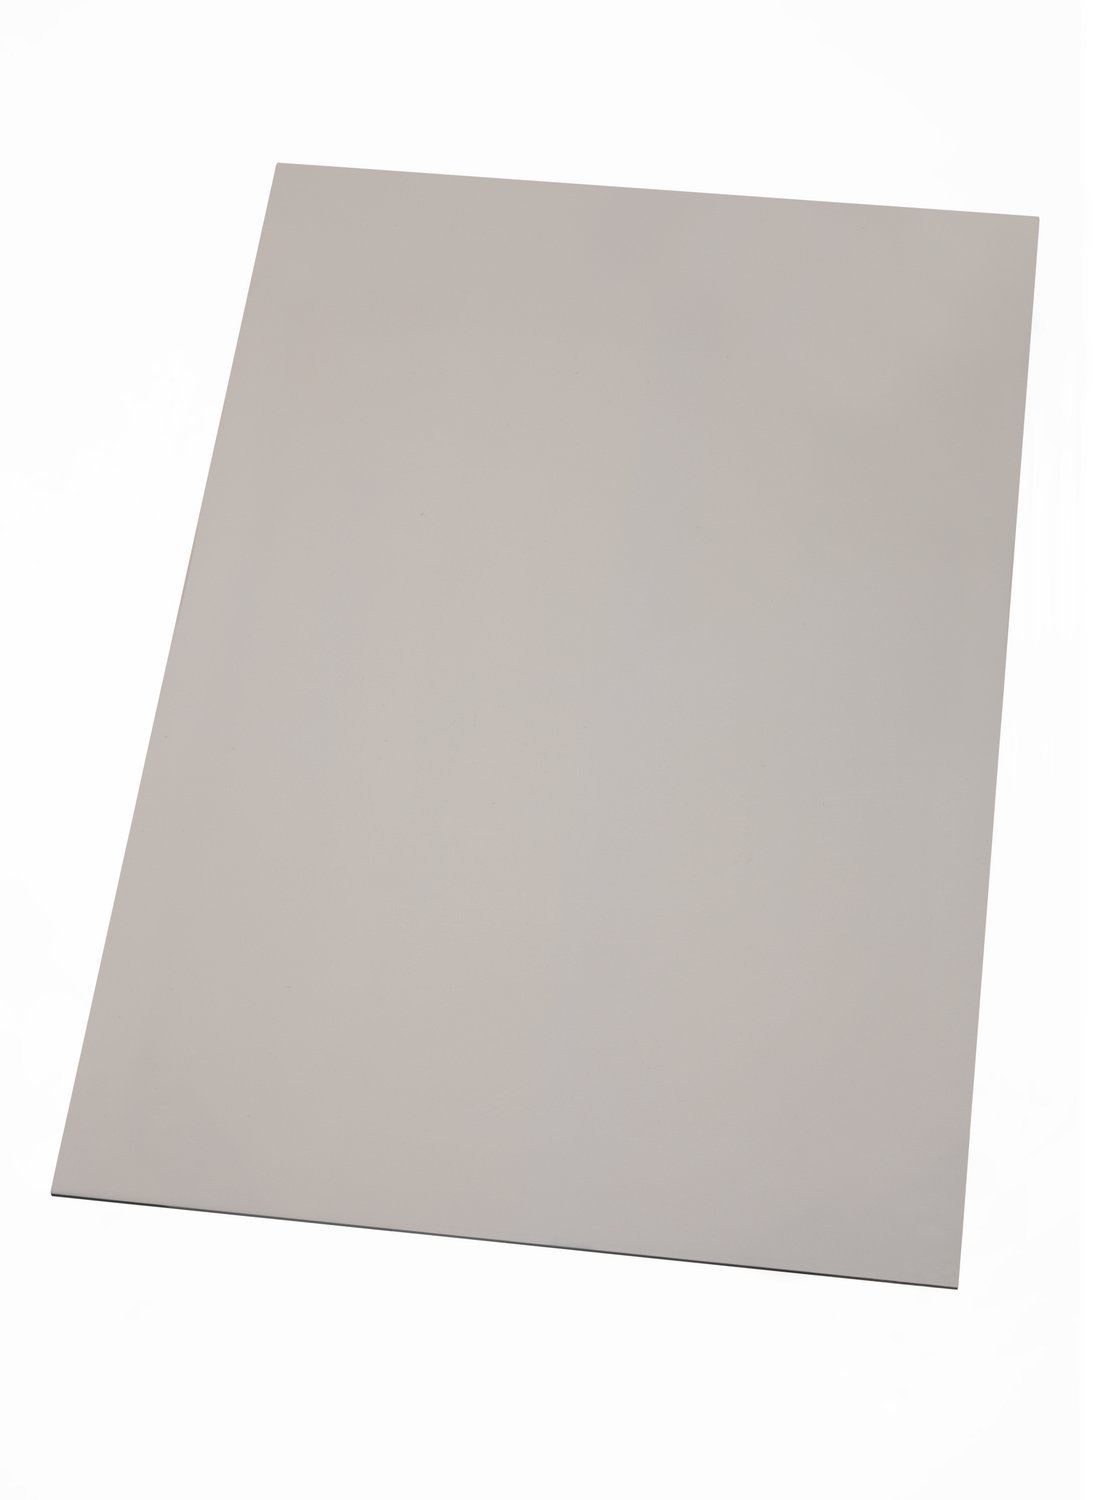 7000100772 - 3M Thermally Conductive Acrylic Interface Pad 5571-15, 0.30 m x 20 m,
1 Roll Each